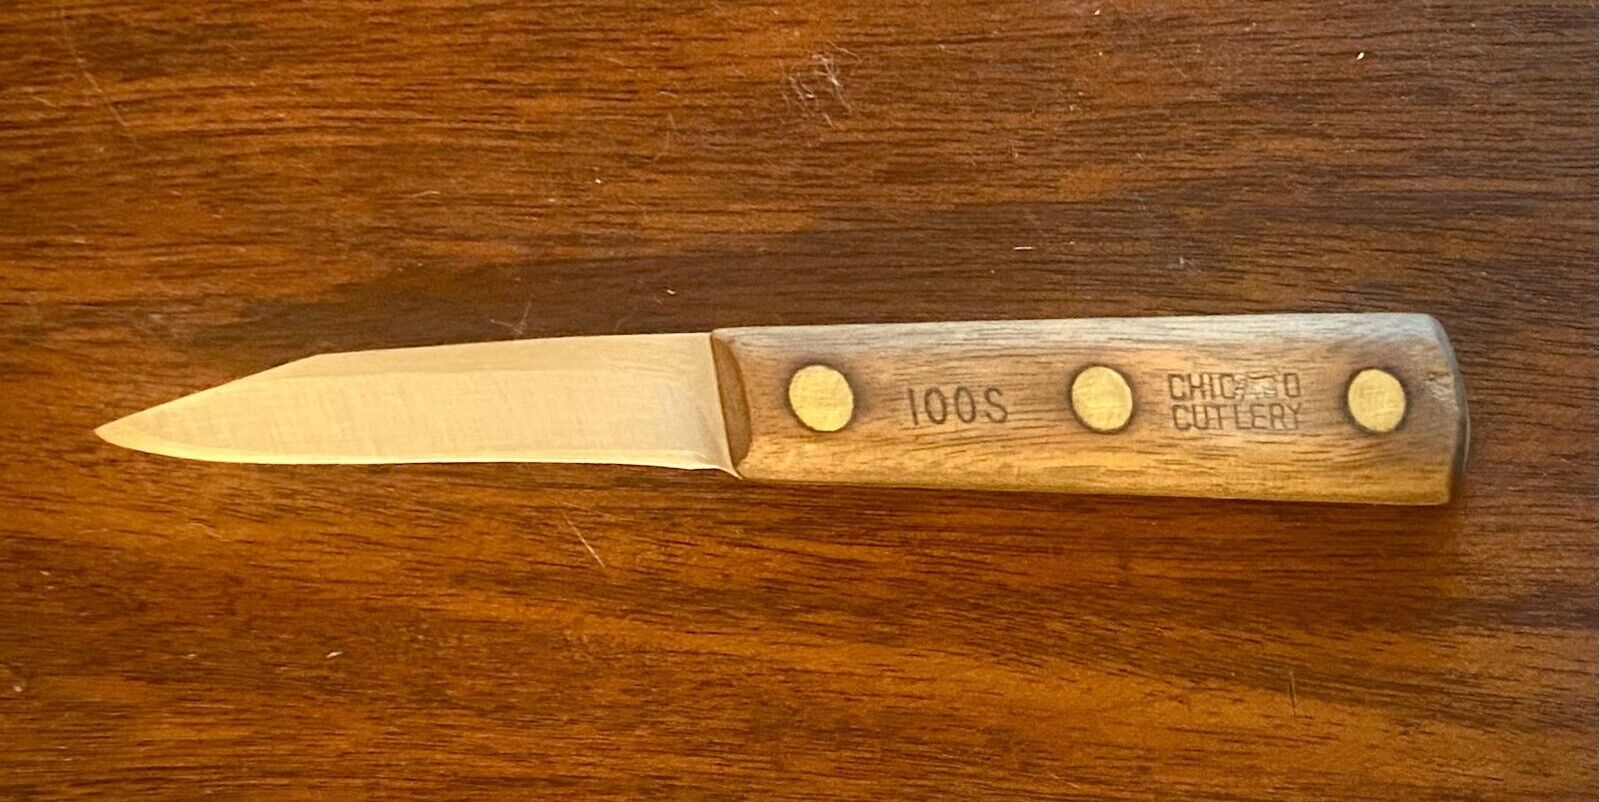 VINTAGE CHICAGO CUTLERY-100S SMALL PAIRING KNIFE FULL TANG WALNUT TRADITION HAND